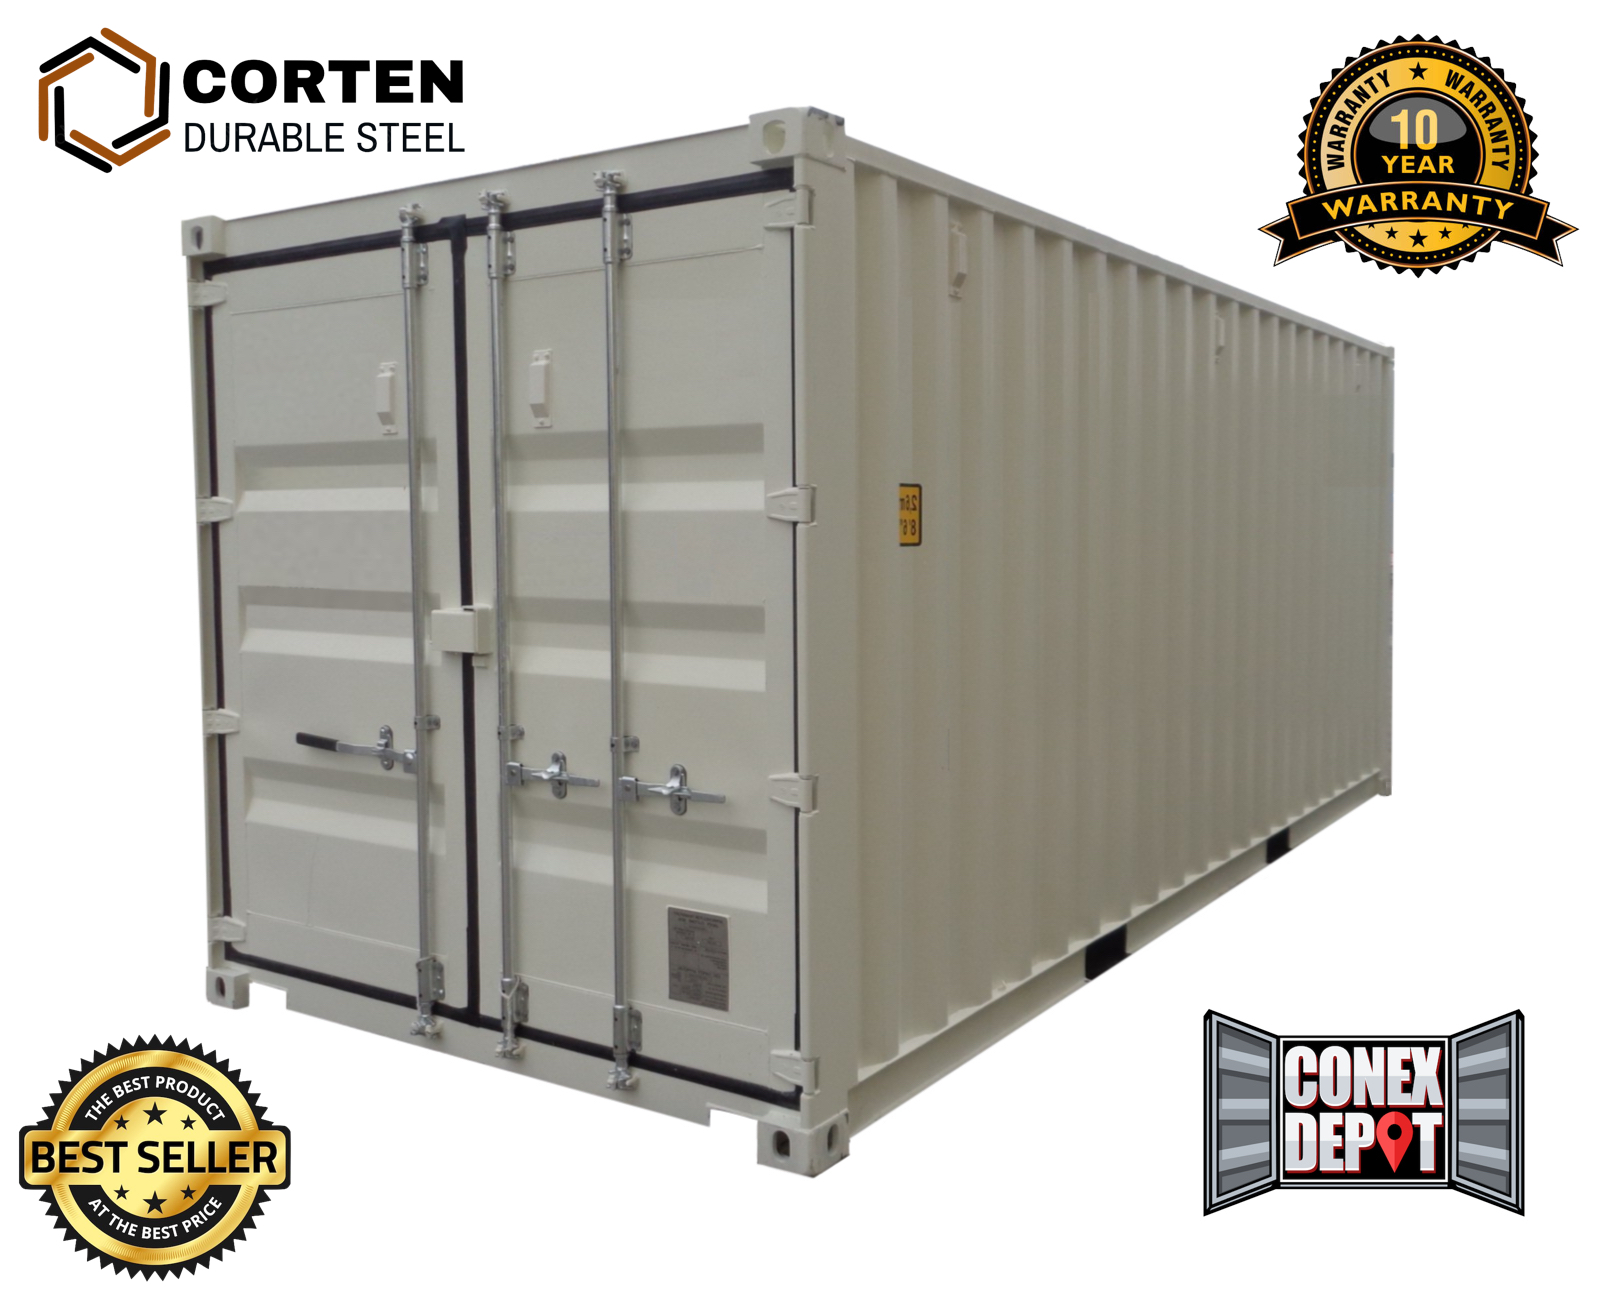 Portable Storage Containers for Sale in MN WI & Chicago